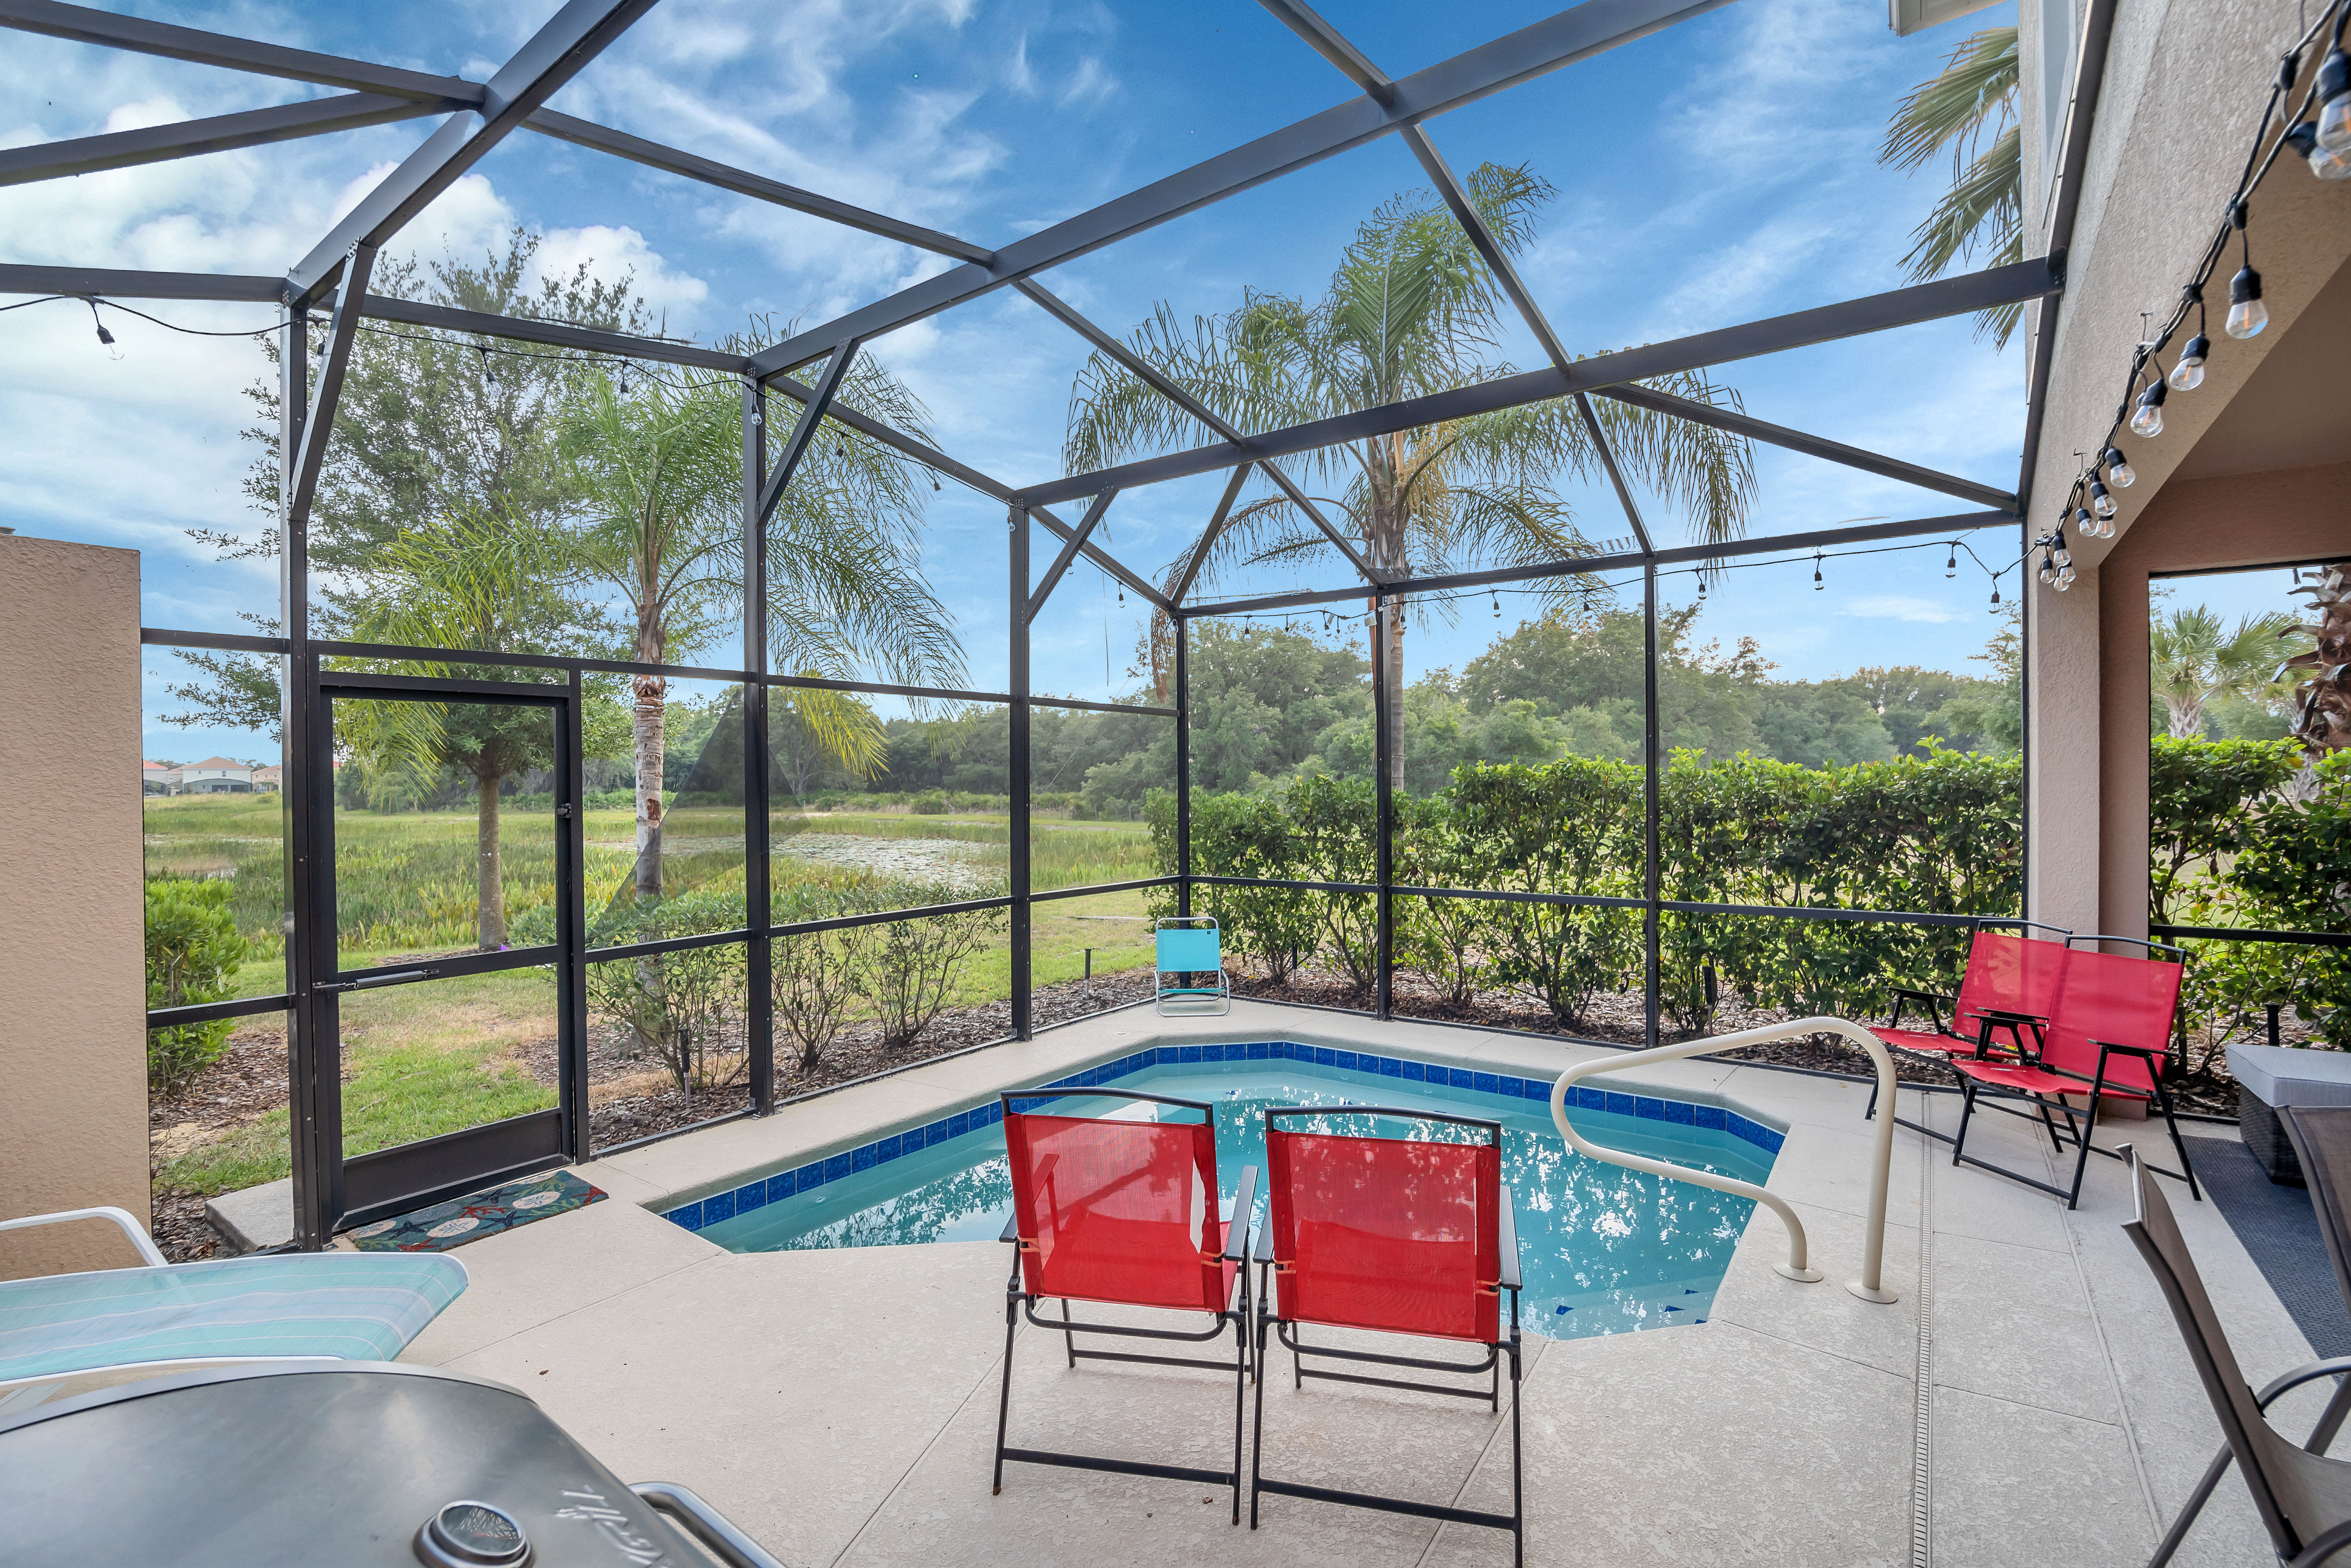 Captivating private pool of the townhouse in Davenport Florida - Bask in sun-kissed luxury near the water - Experience ultimate relaxation in poolside paradise - Comfortable lounge chairs for ultimate relaxation